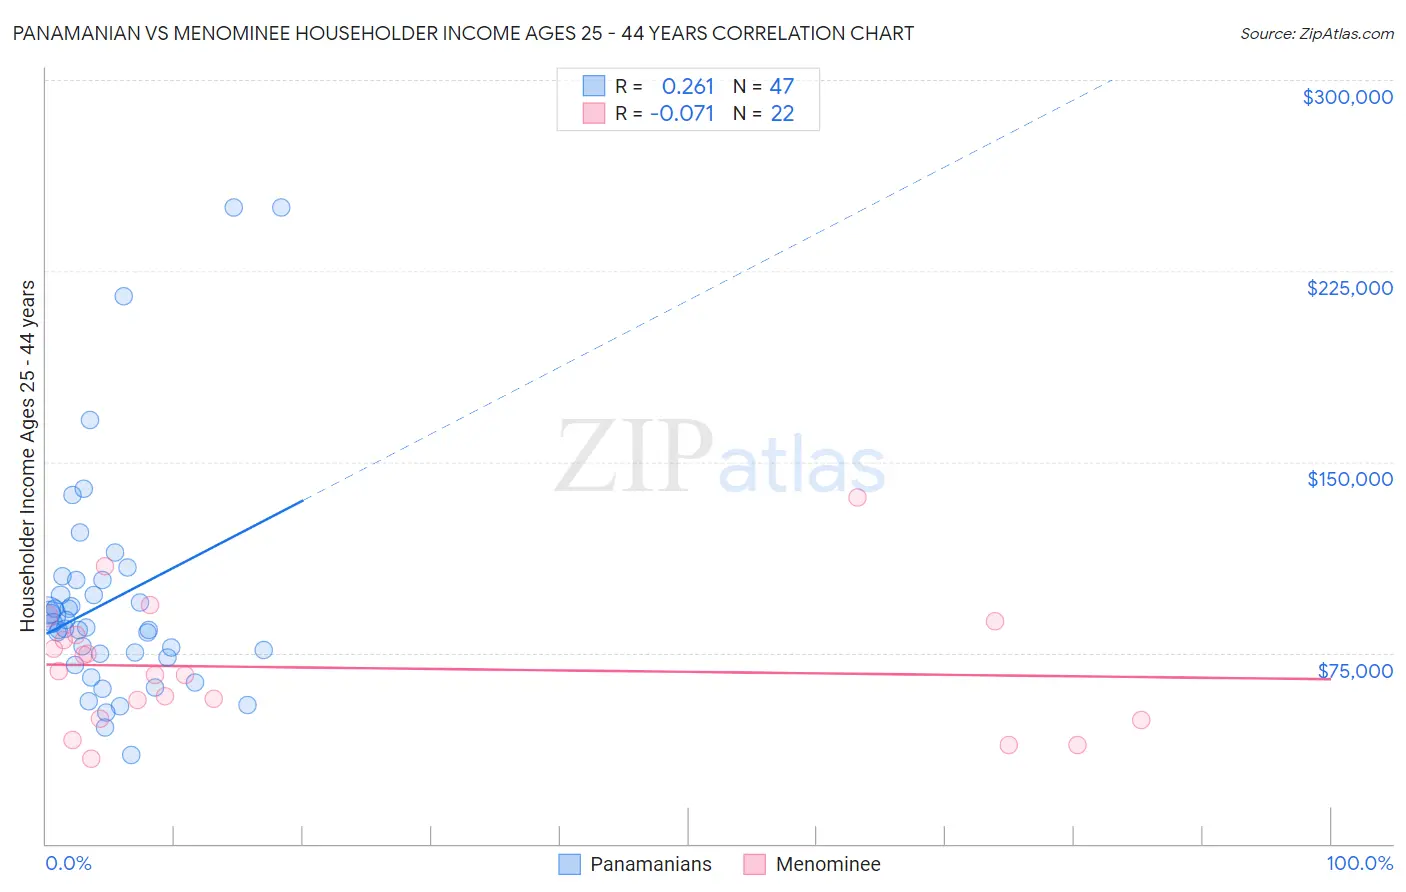 Panamanian vs Menominee Householder Income Ages 25 - 44 years